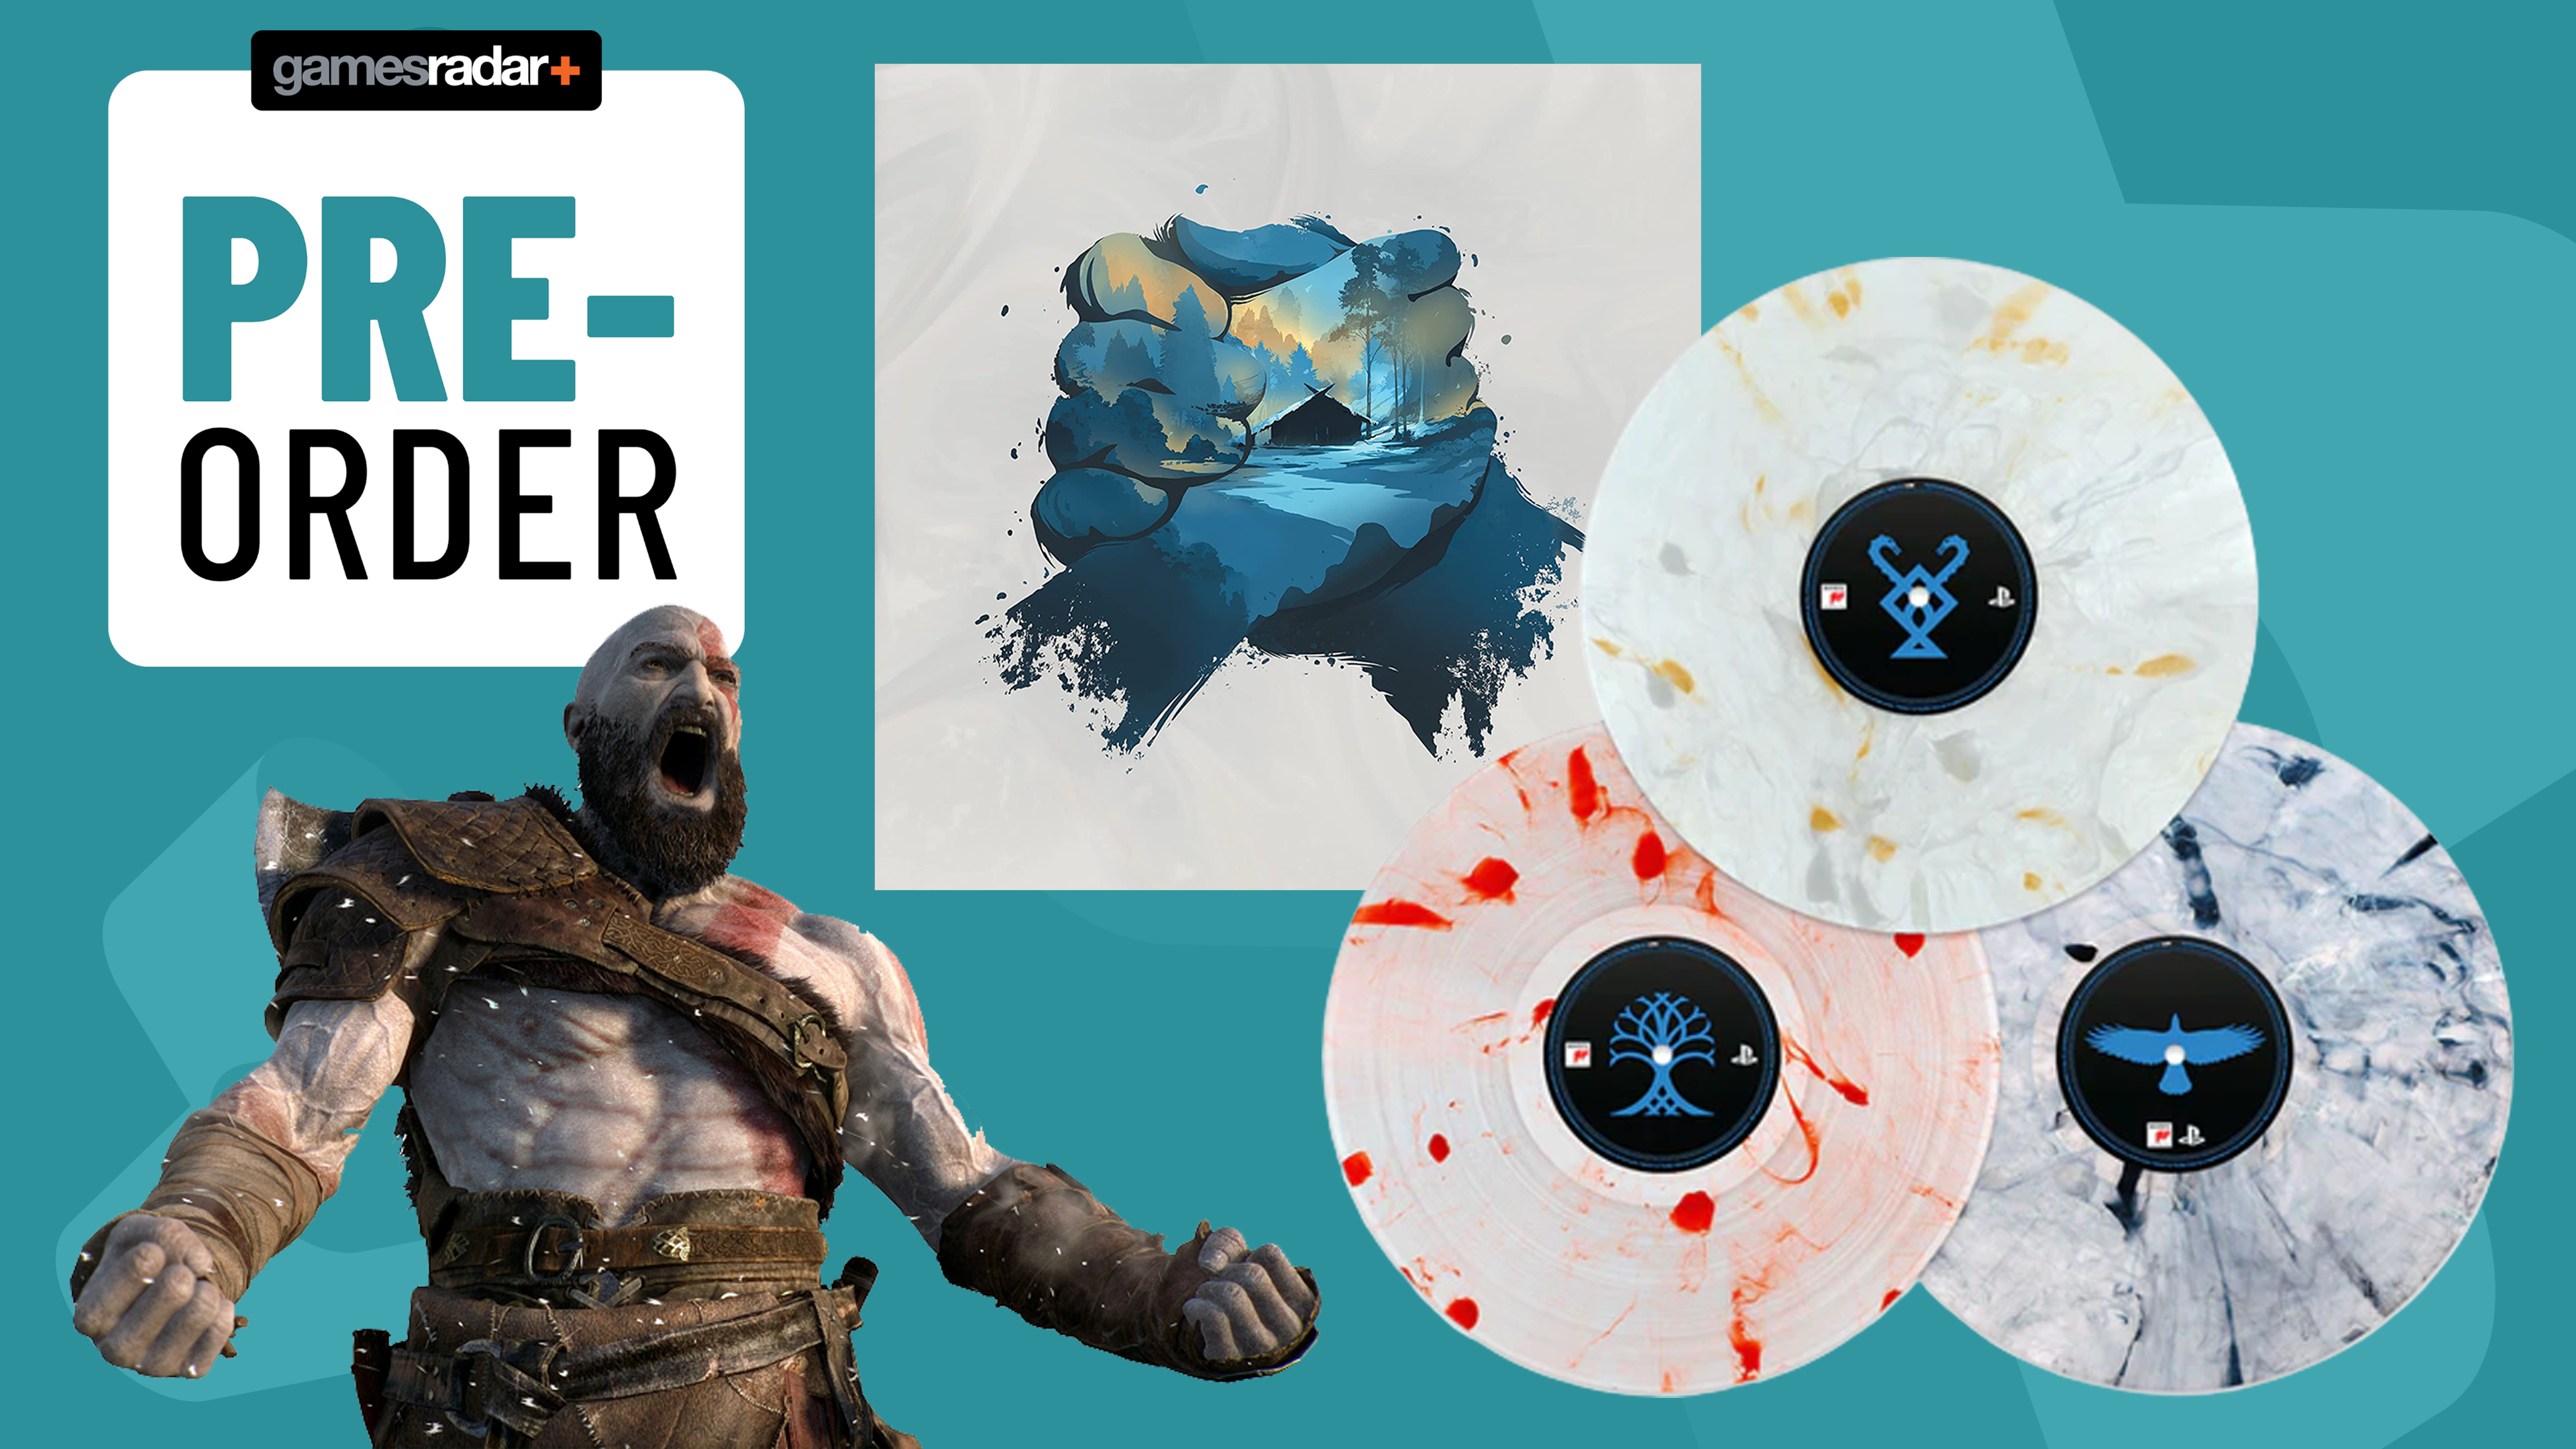 God of War Ragnarok PS5 Bundles Are Now Available to Order - IGN